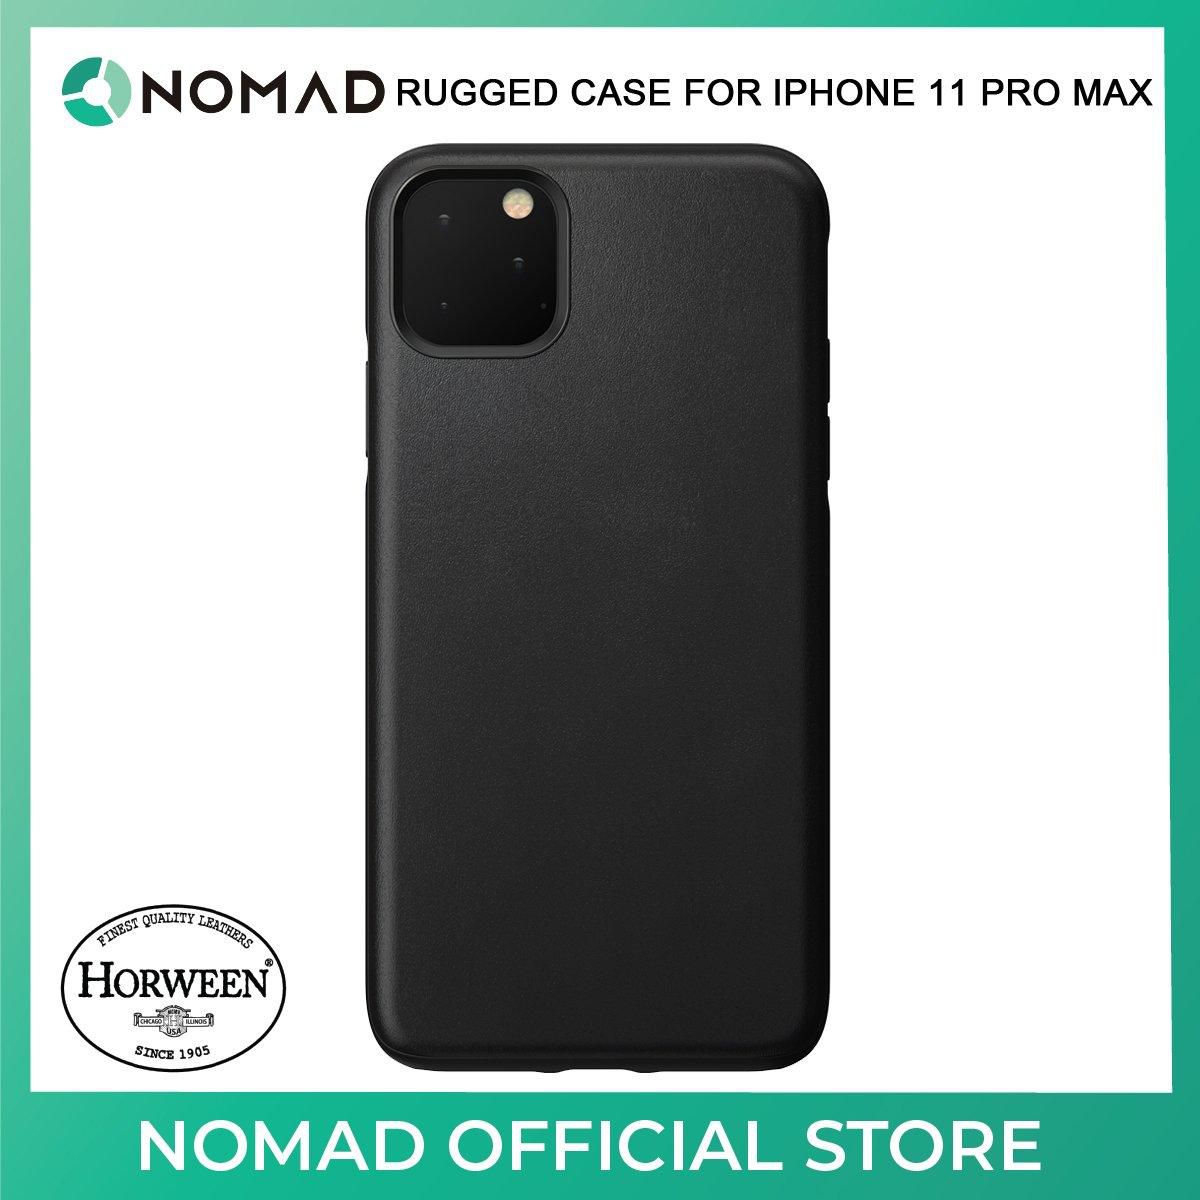 Nomad Rugged Case For iPhone 11 Pro Max (Black)